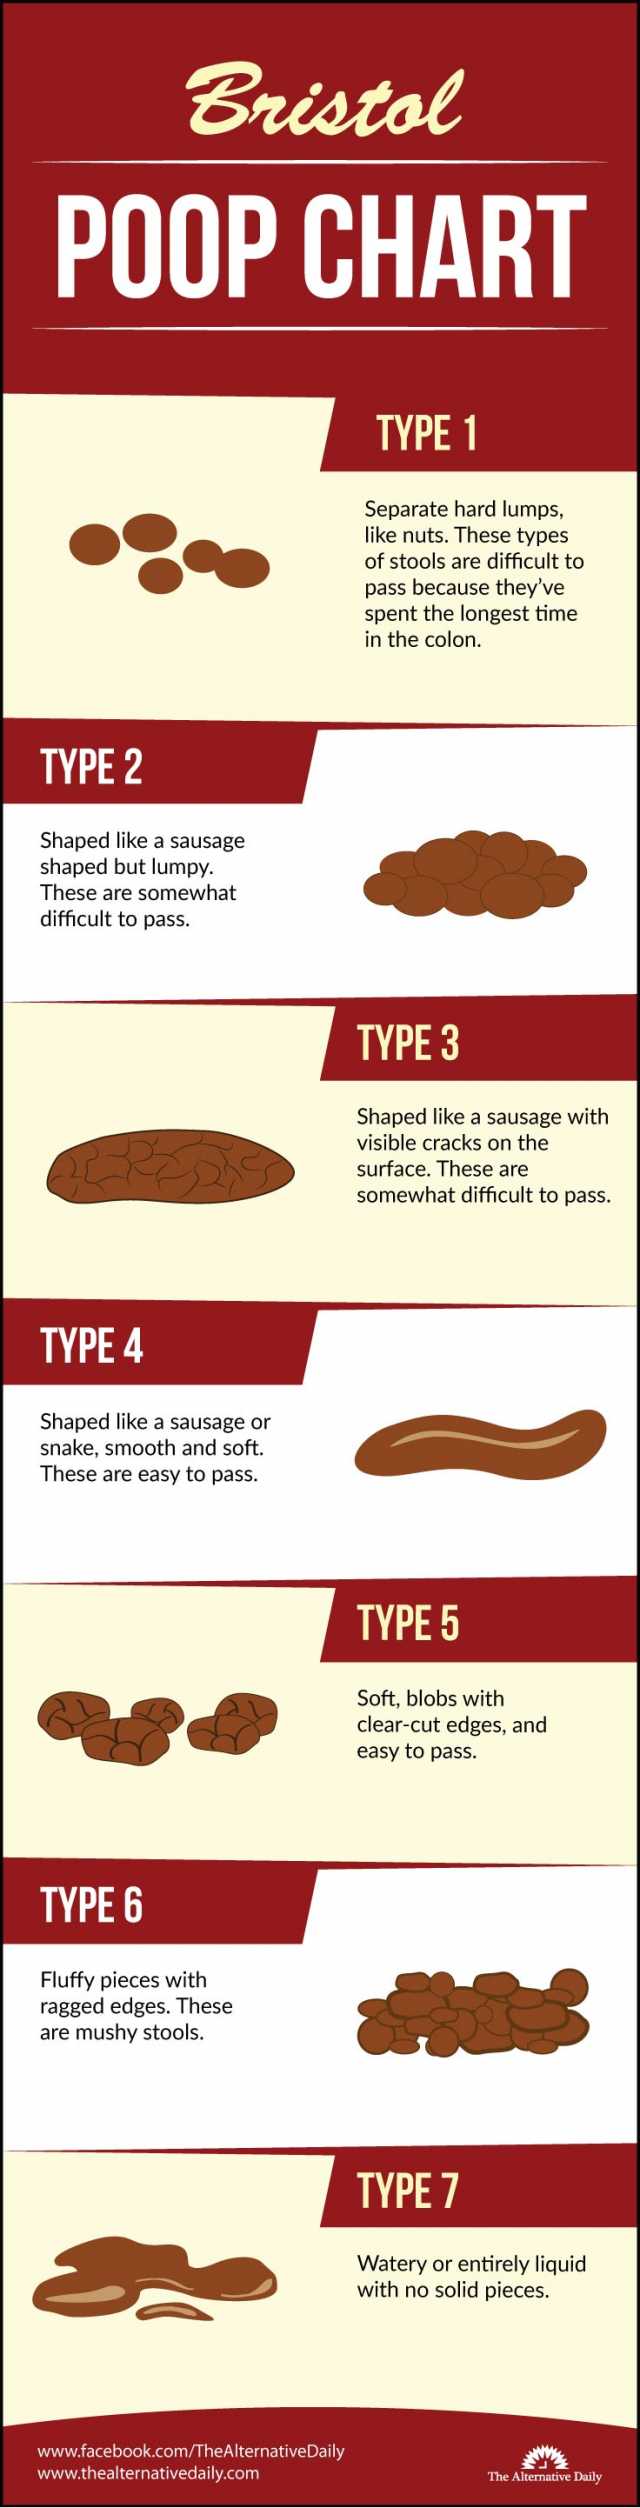 Bristol Poop Chart: Which Of These 7 Types Of Poop Do You Have?